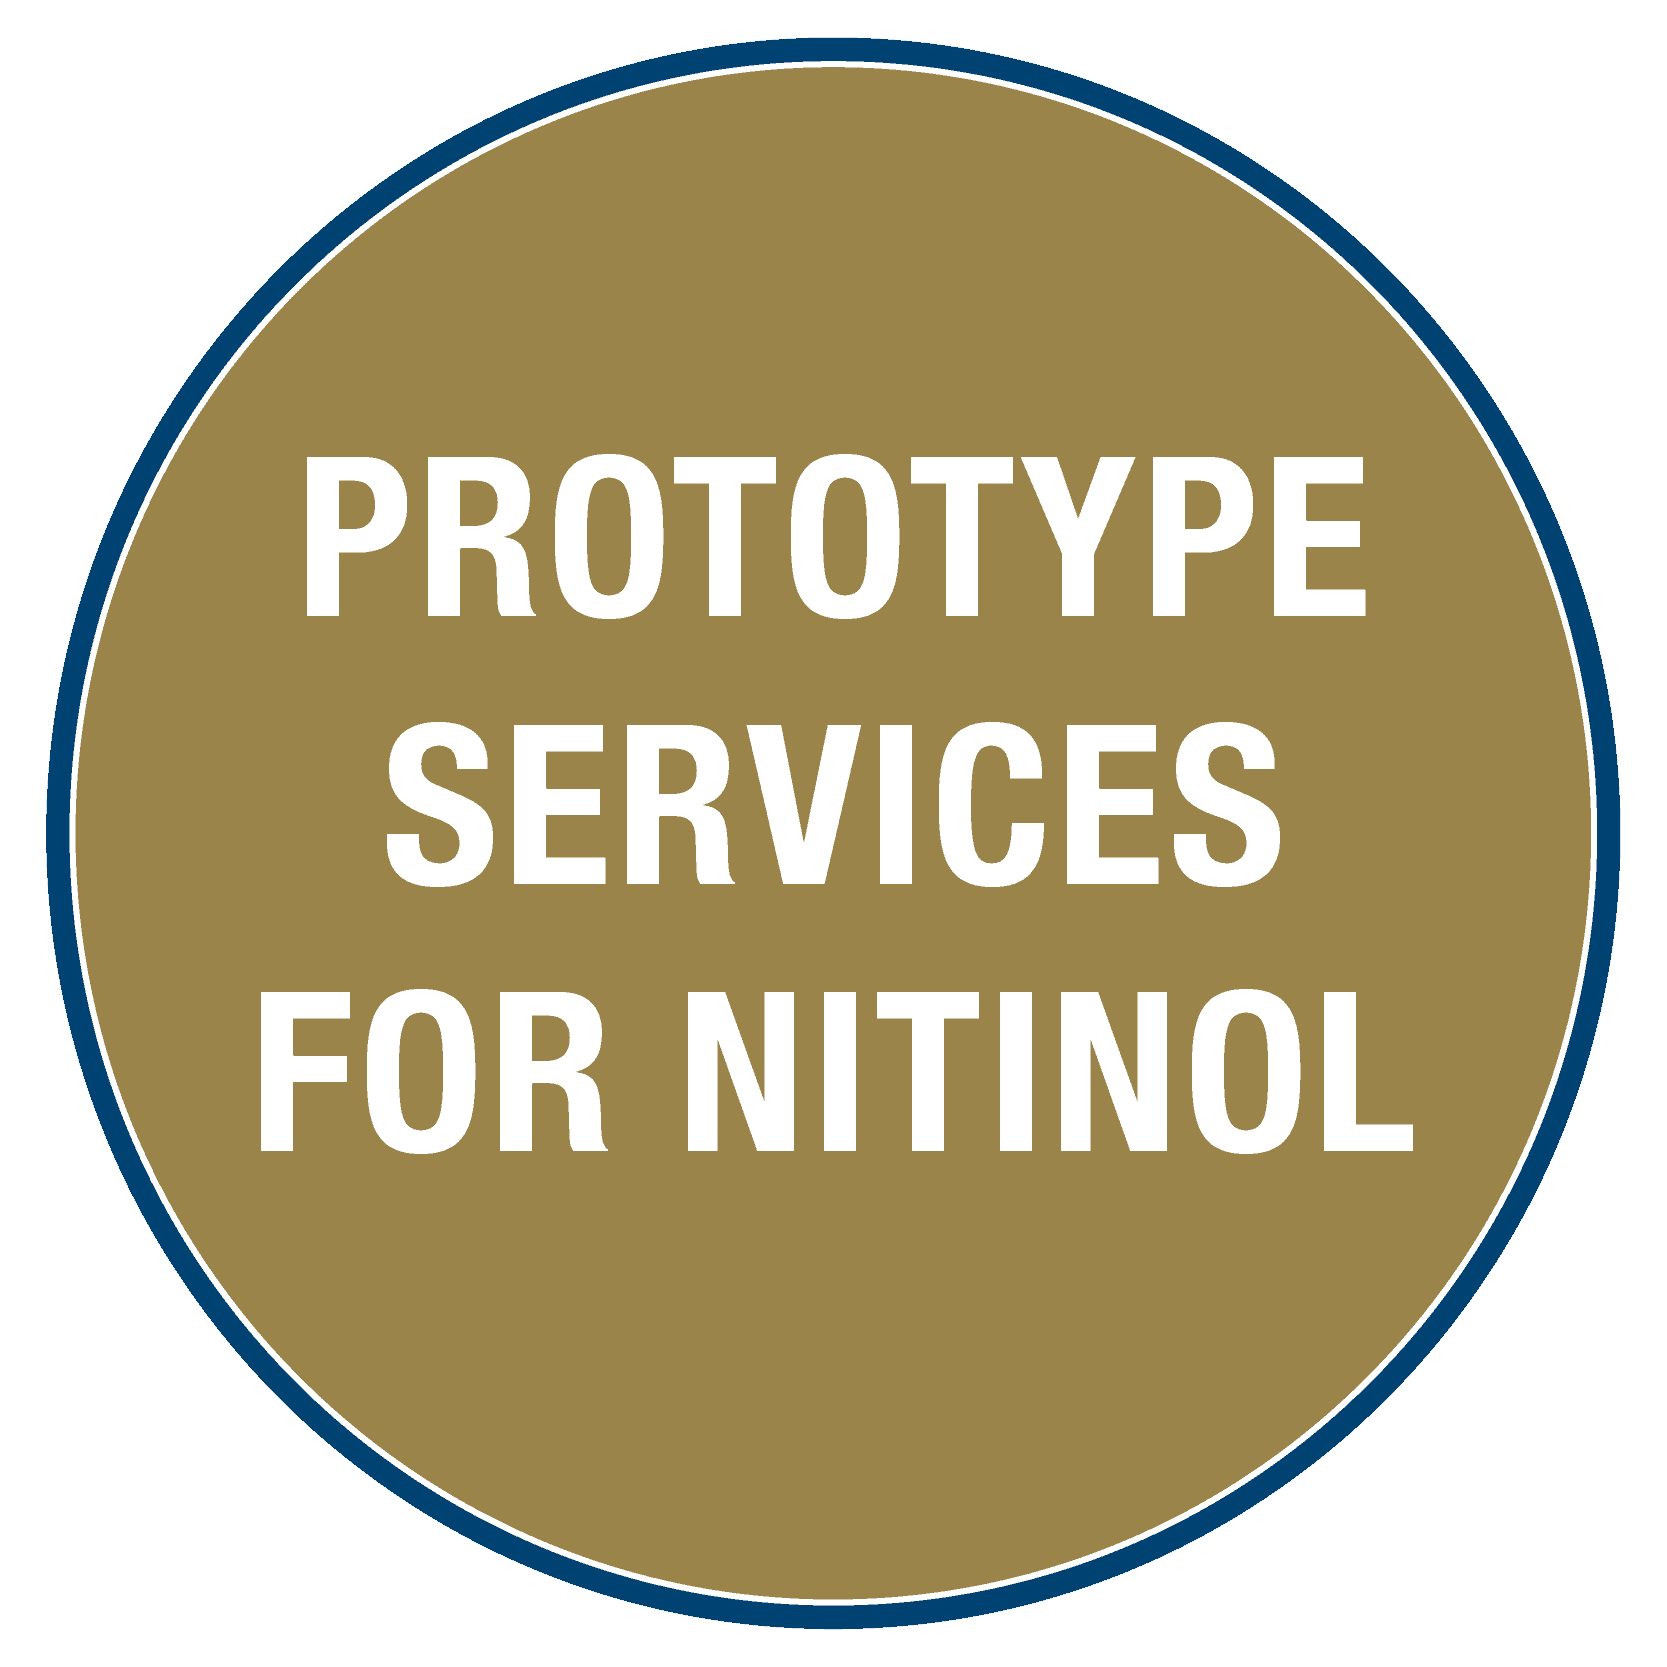 Prototype Services for Nitinol